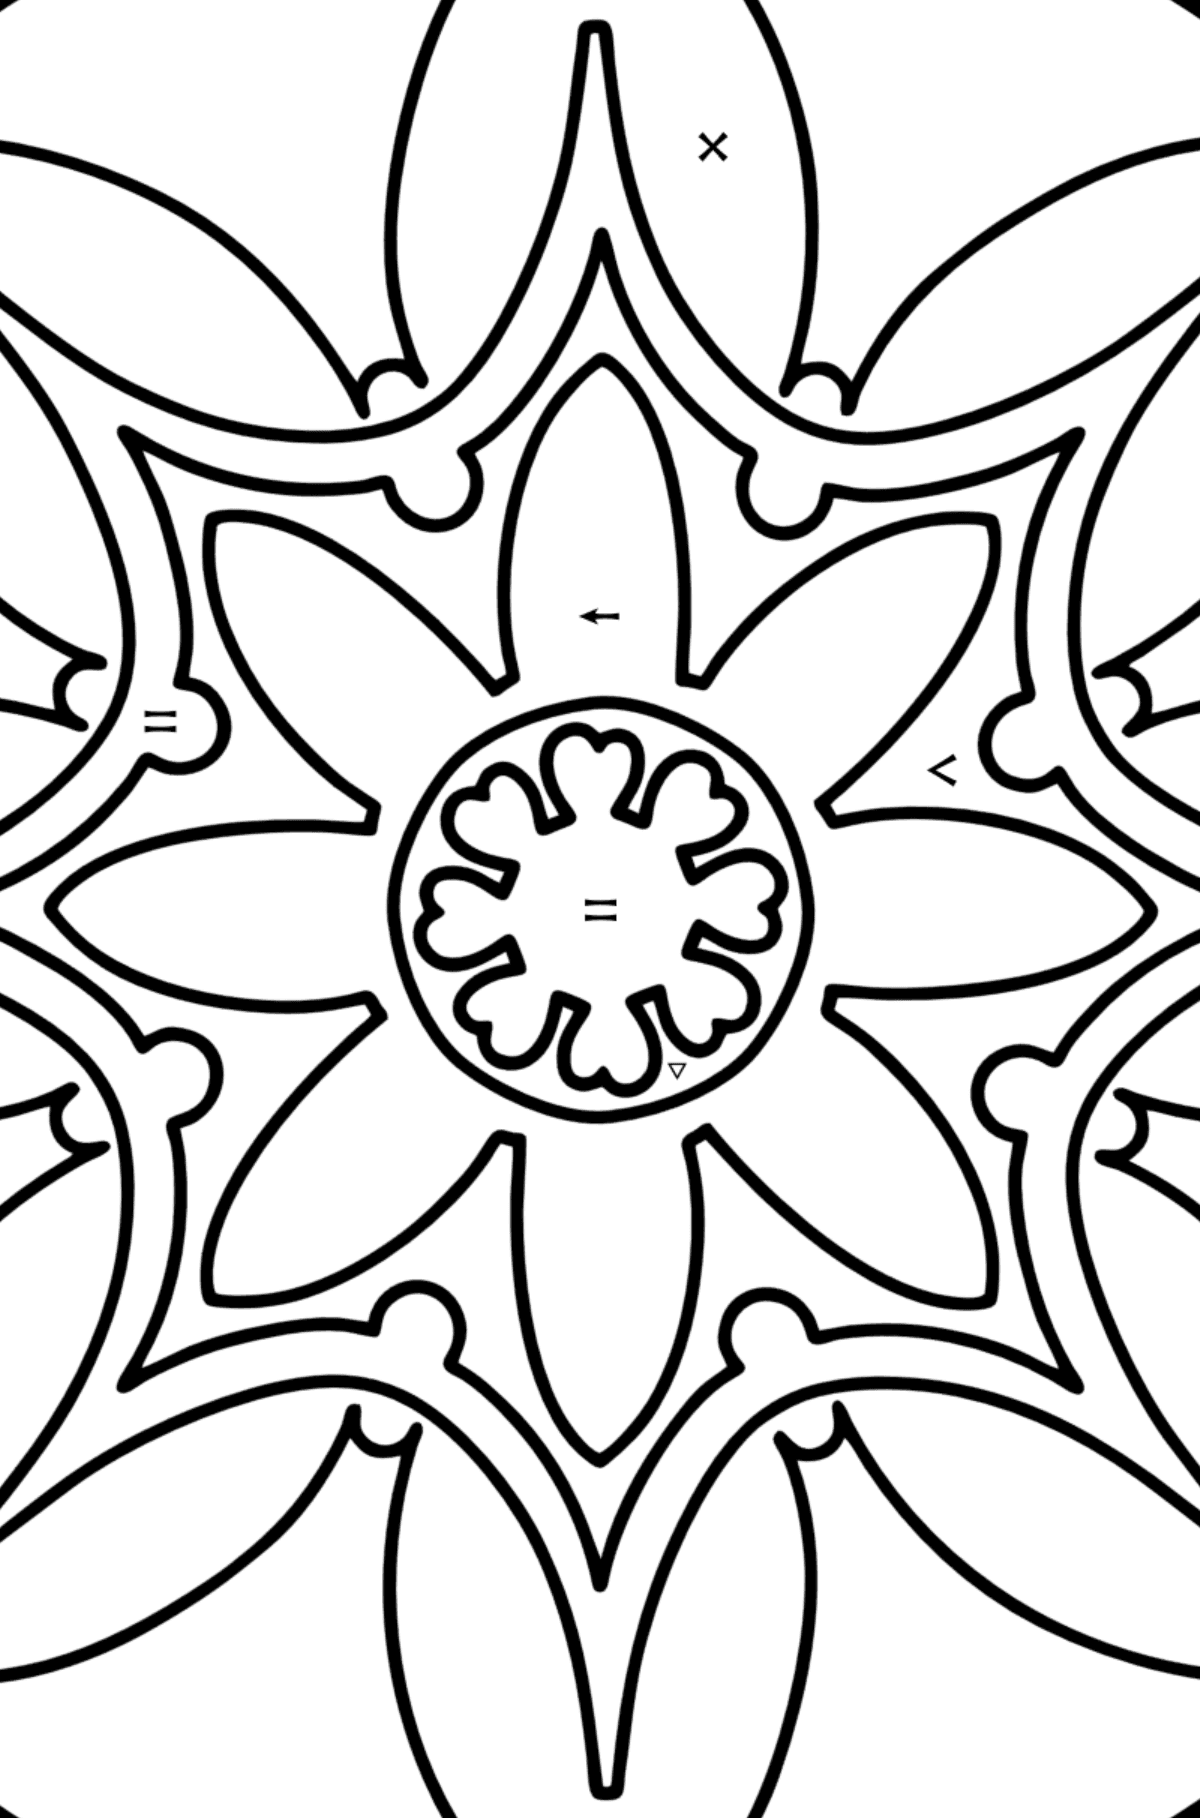 Mandala coloring page - 7 elements - Coloring by Symbols for Kids